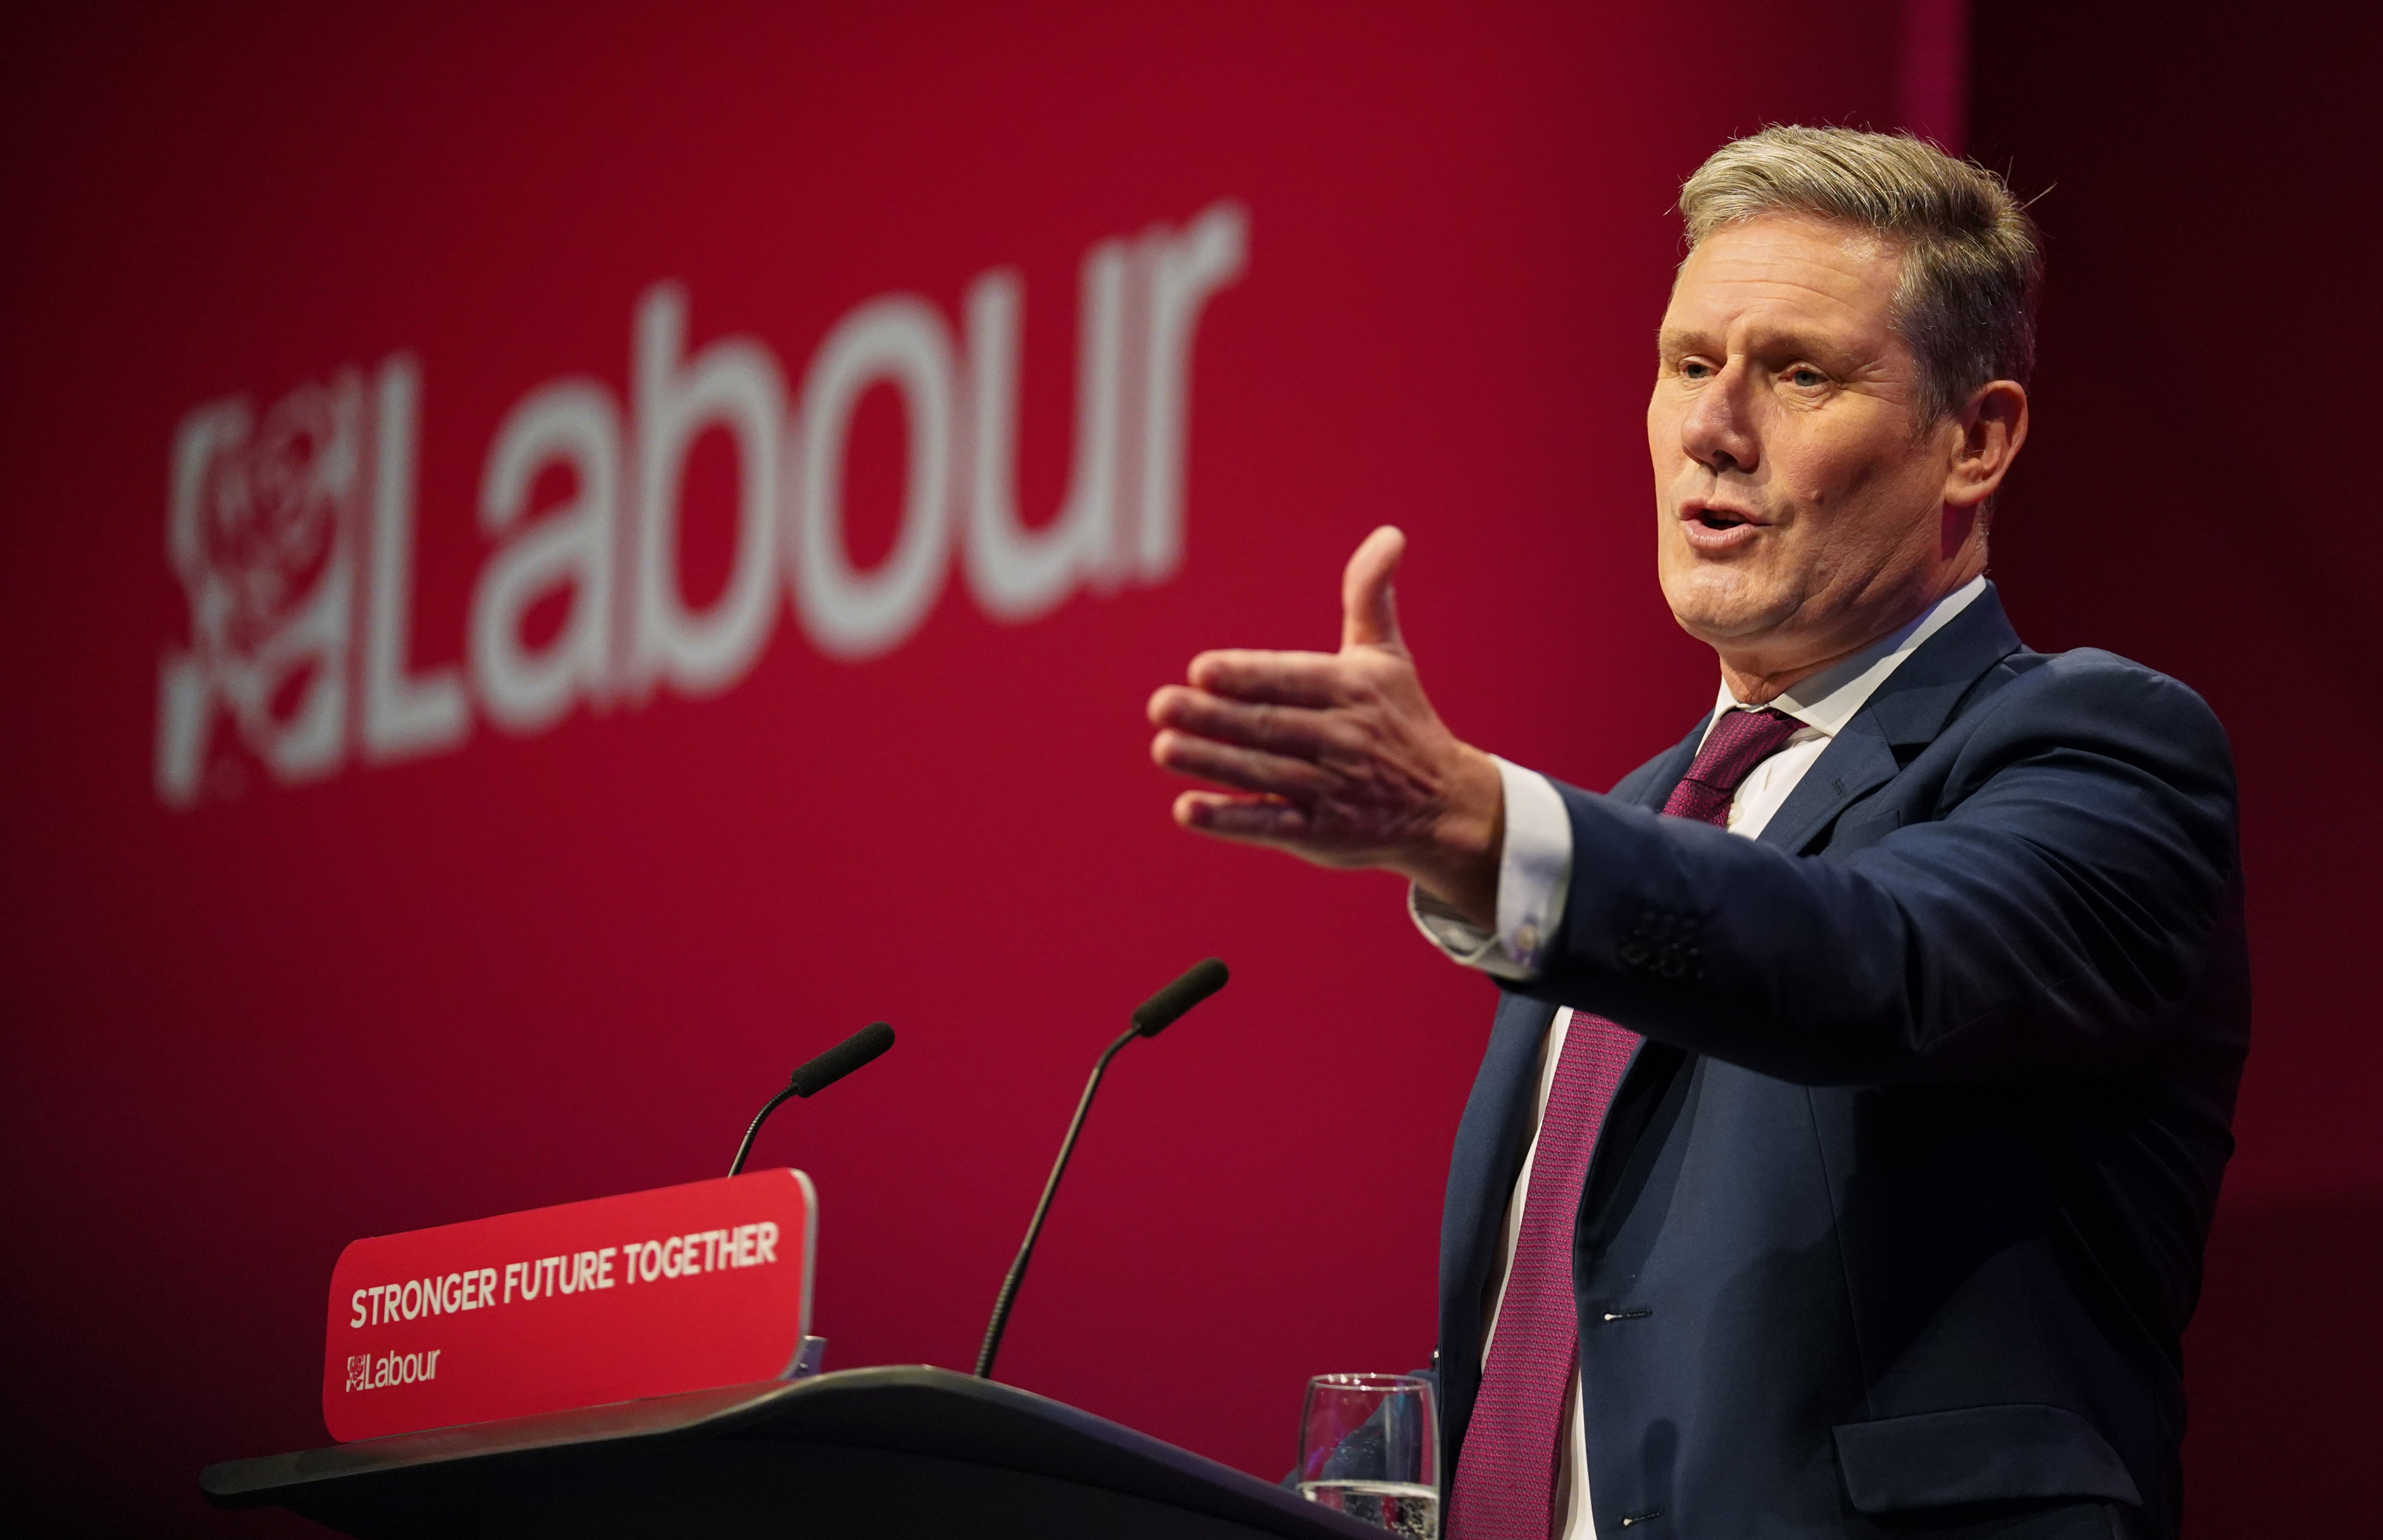 Leader Keir Starmer gives his keynote speech at conference on Wednesday